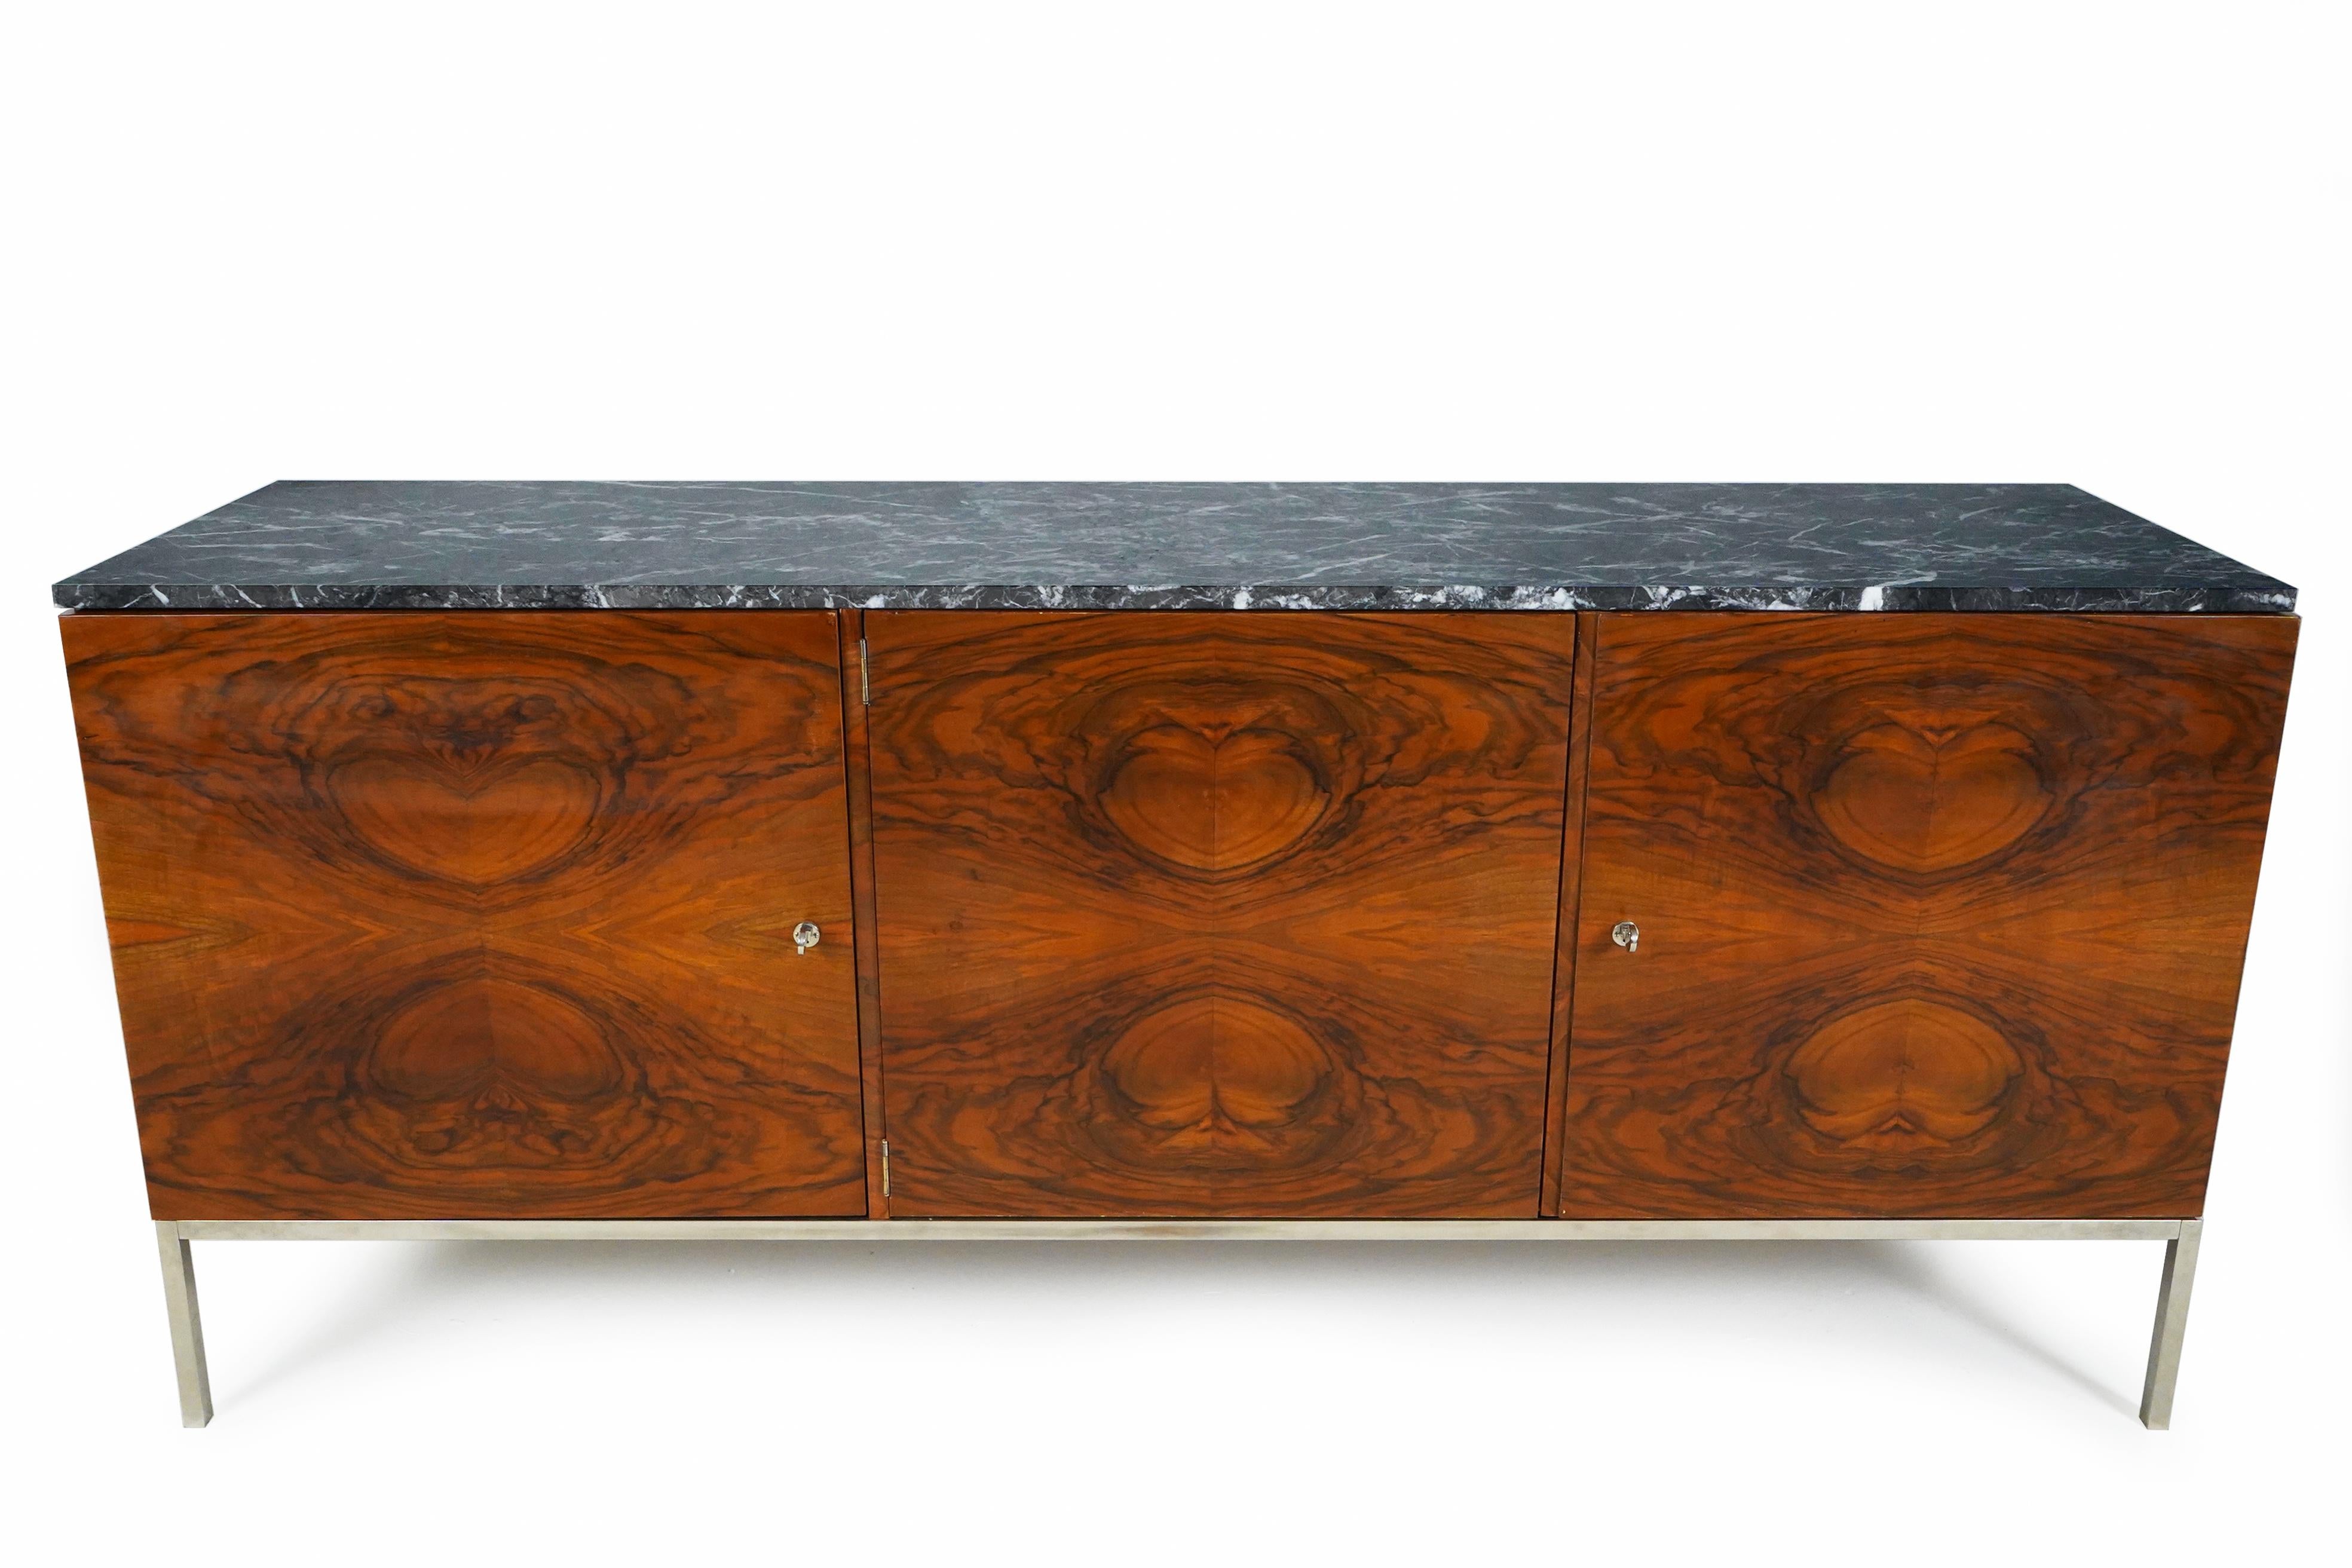 A fine midcentury sideboard made with book-matched walnut veneer doors, a beautifully-veined marble top and steel frame. This is a fine example of Minimalist design executed with fine materials, meticulously assembled. The veneer sheets are bold in